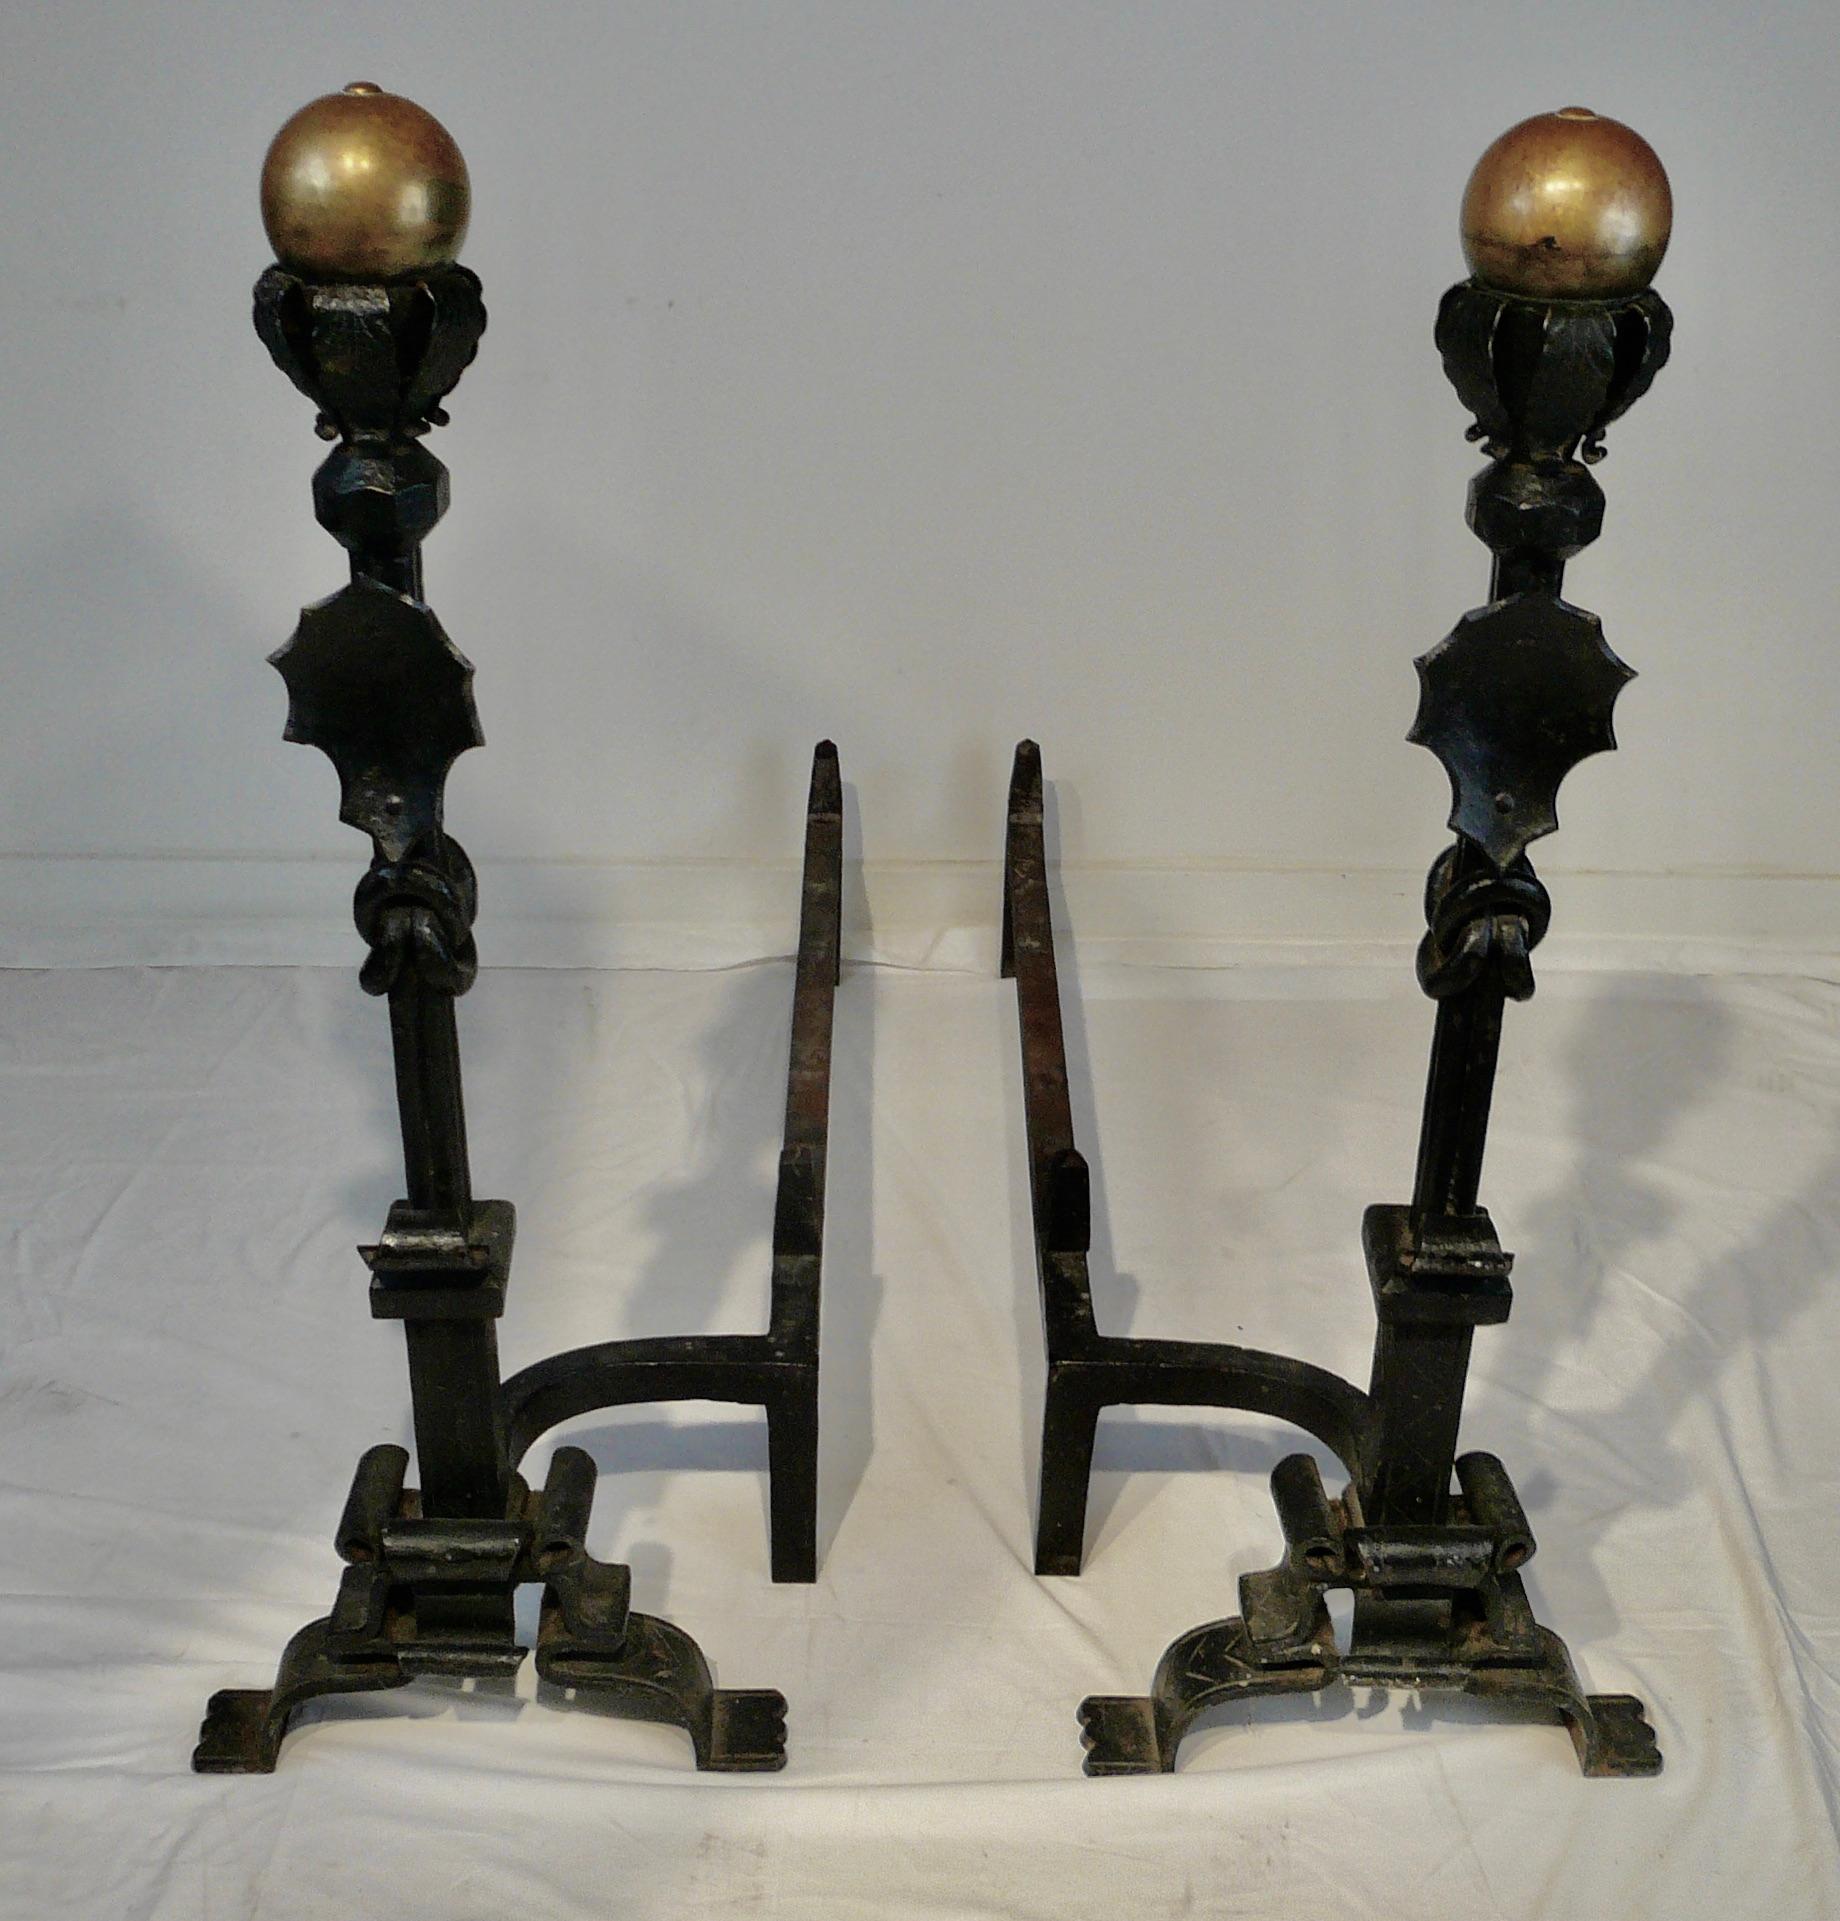 This large and impressive pair of wrought iron and brass andirons are attributed to the famous American maker Samuel Yellin.